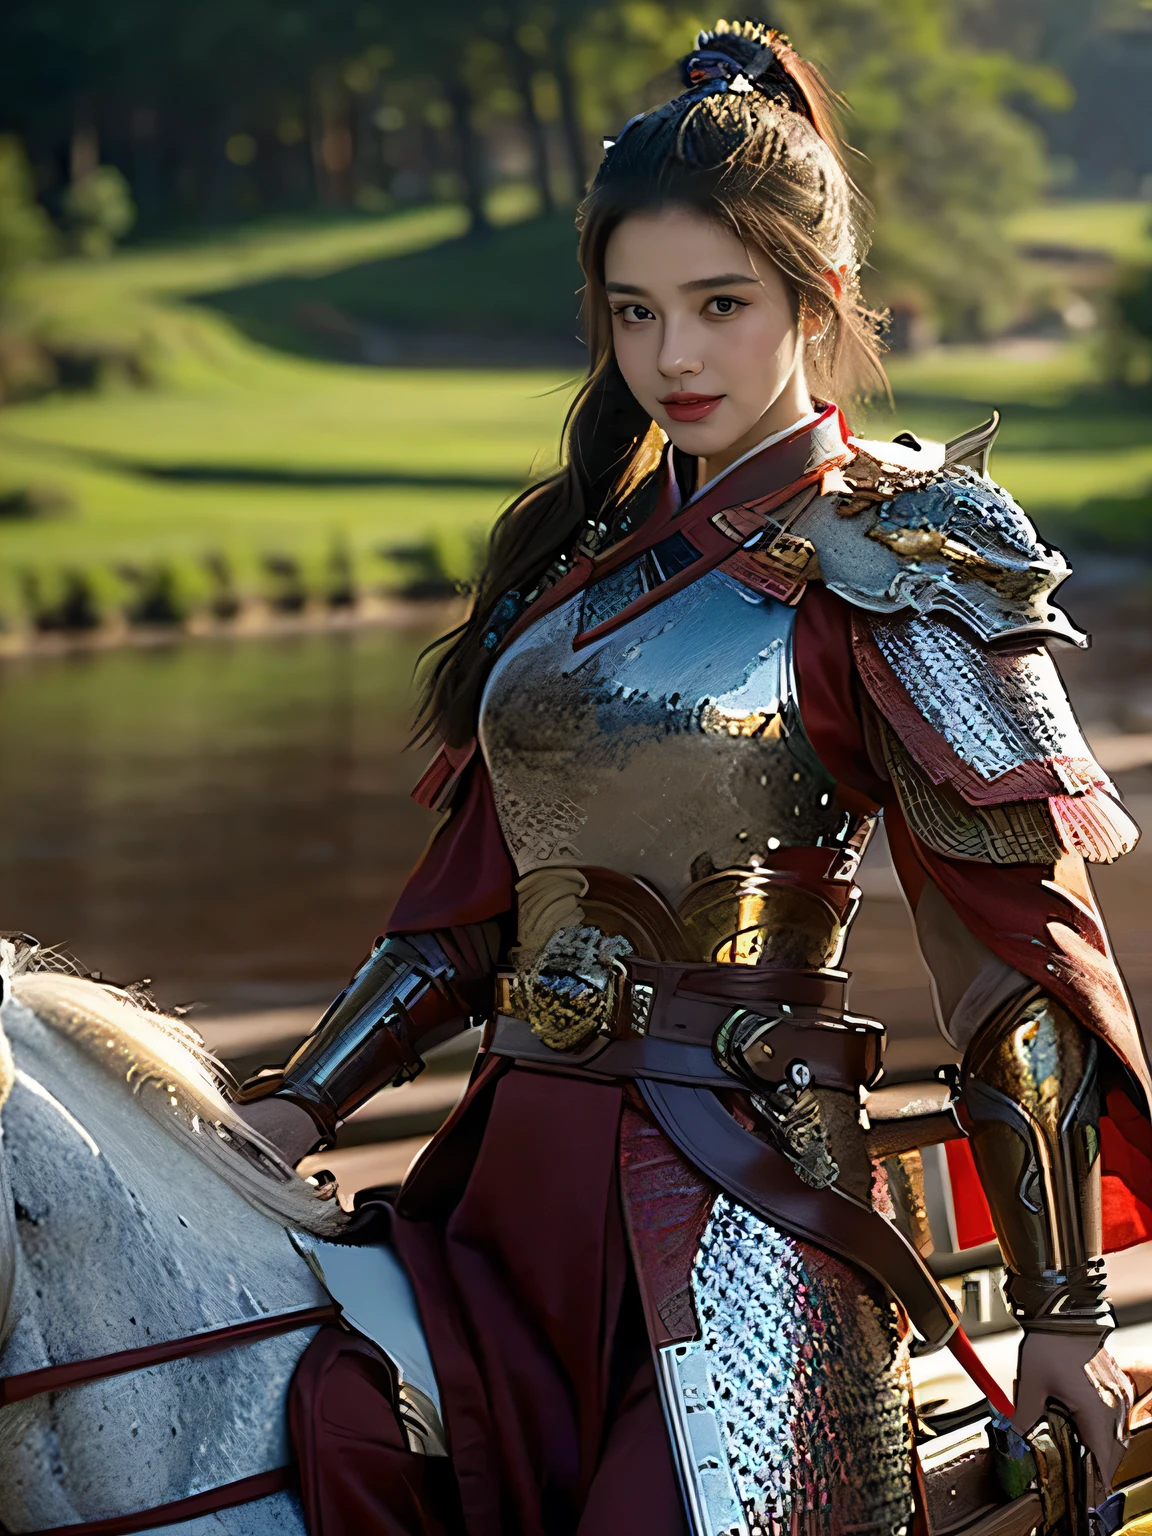 masterpiece，Best quality，HD quality，face close-up，A high resolution，8K，Ancient battlefield background, ((field：1.8))，(Female generals on the battlefield in the Han Dynasty)，(mounted on a horse)，18-year-old girl，（long ponytail hairstyle)，cparted lips，Full and erect breasts，Noble and charming，Elegant and serious，Chinese armor,sword, Chinese architecture, Brown cape，，The combination of white metal and red leather，chest armor，metallic luster，Leather buckle，Exquisite pattern，mysterious badge，Cool and gorgeouig breasts))，Chest groove，Three Kingdoms character painting style，Photo pose，oc render reflection texture，charming smile，Head-up shot，bright afternoon，woodland background